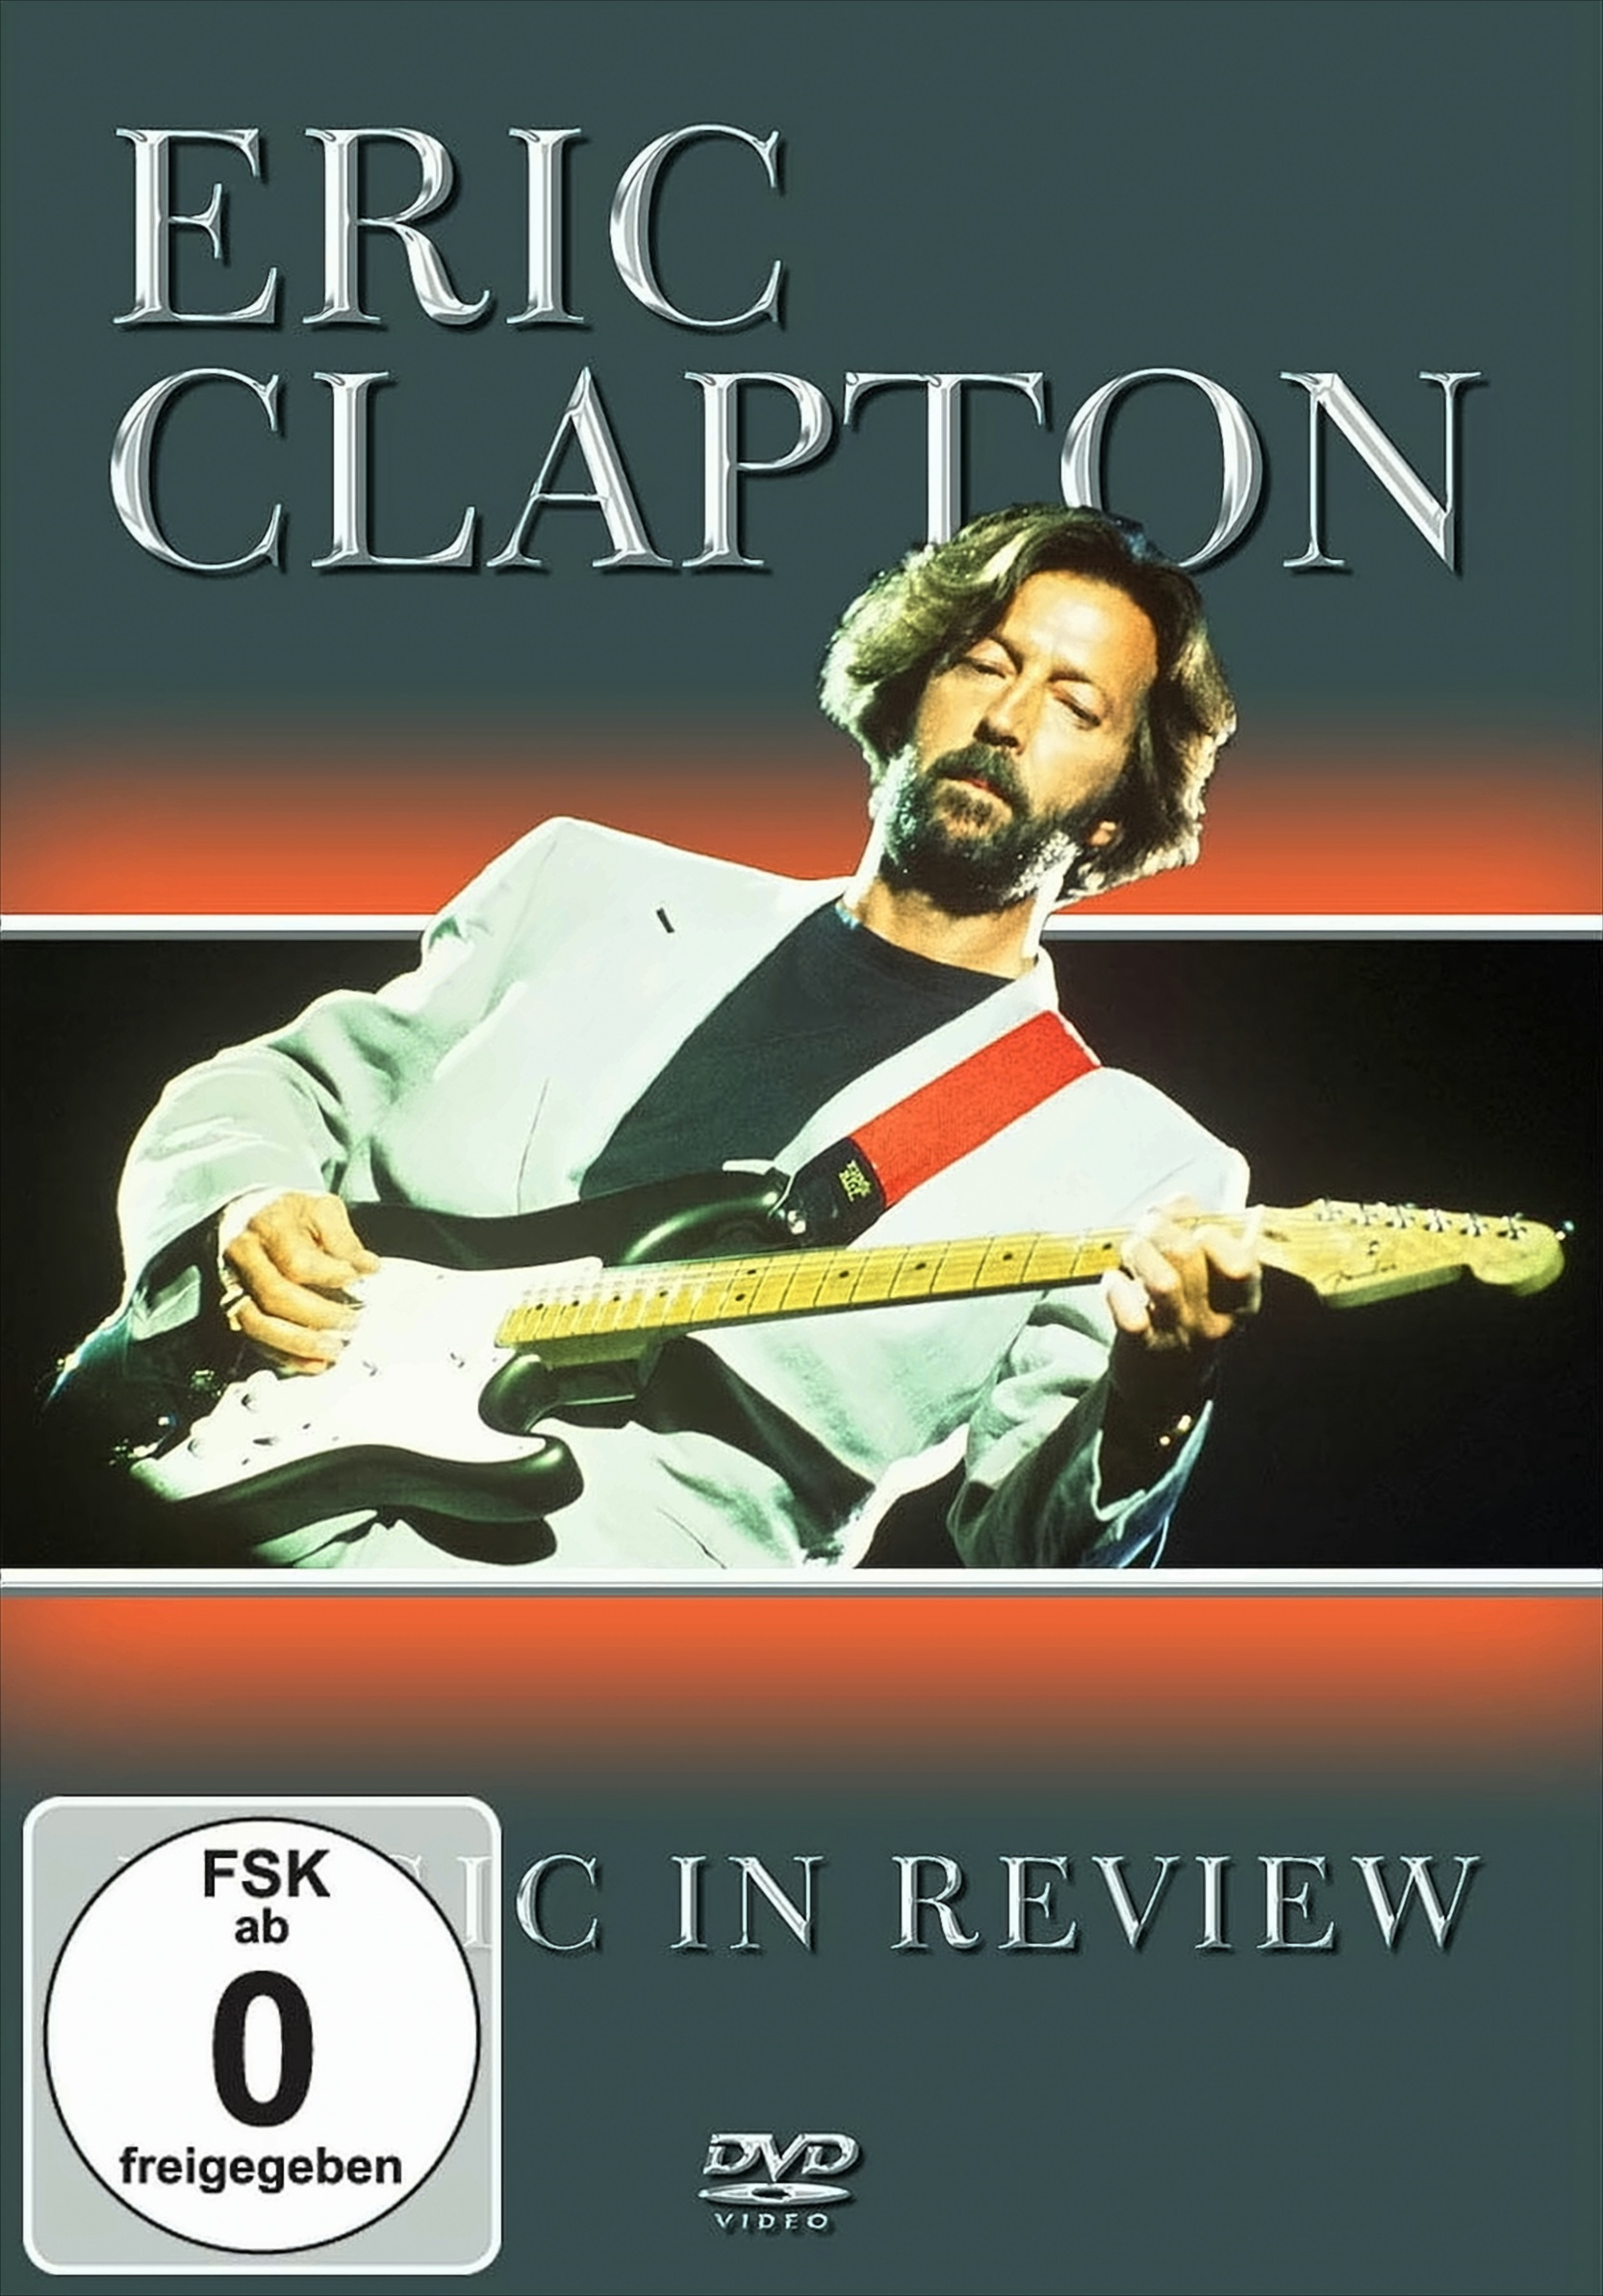 Eric Clapton - Music in Review DVD